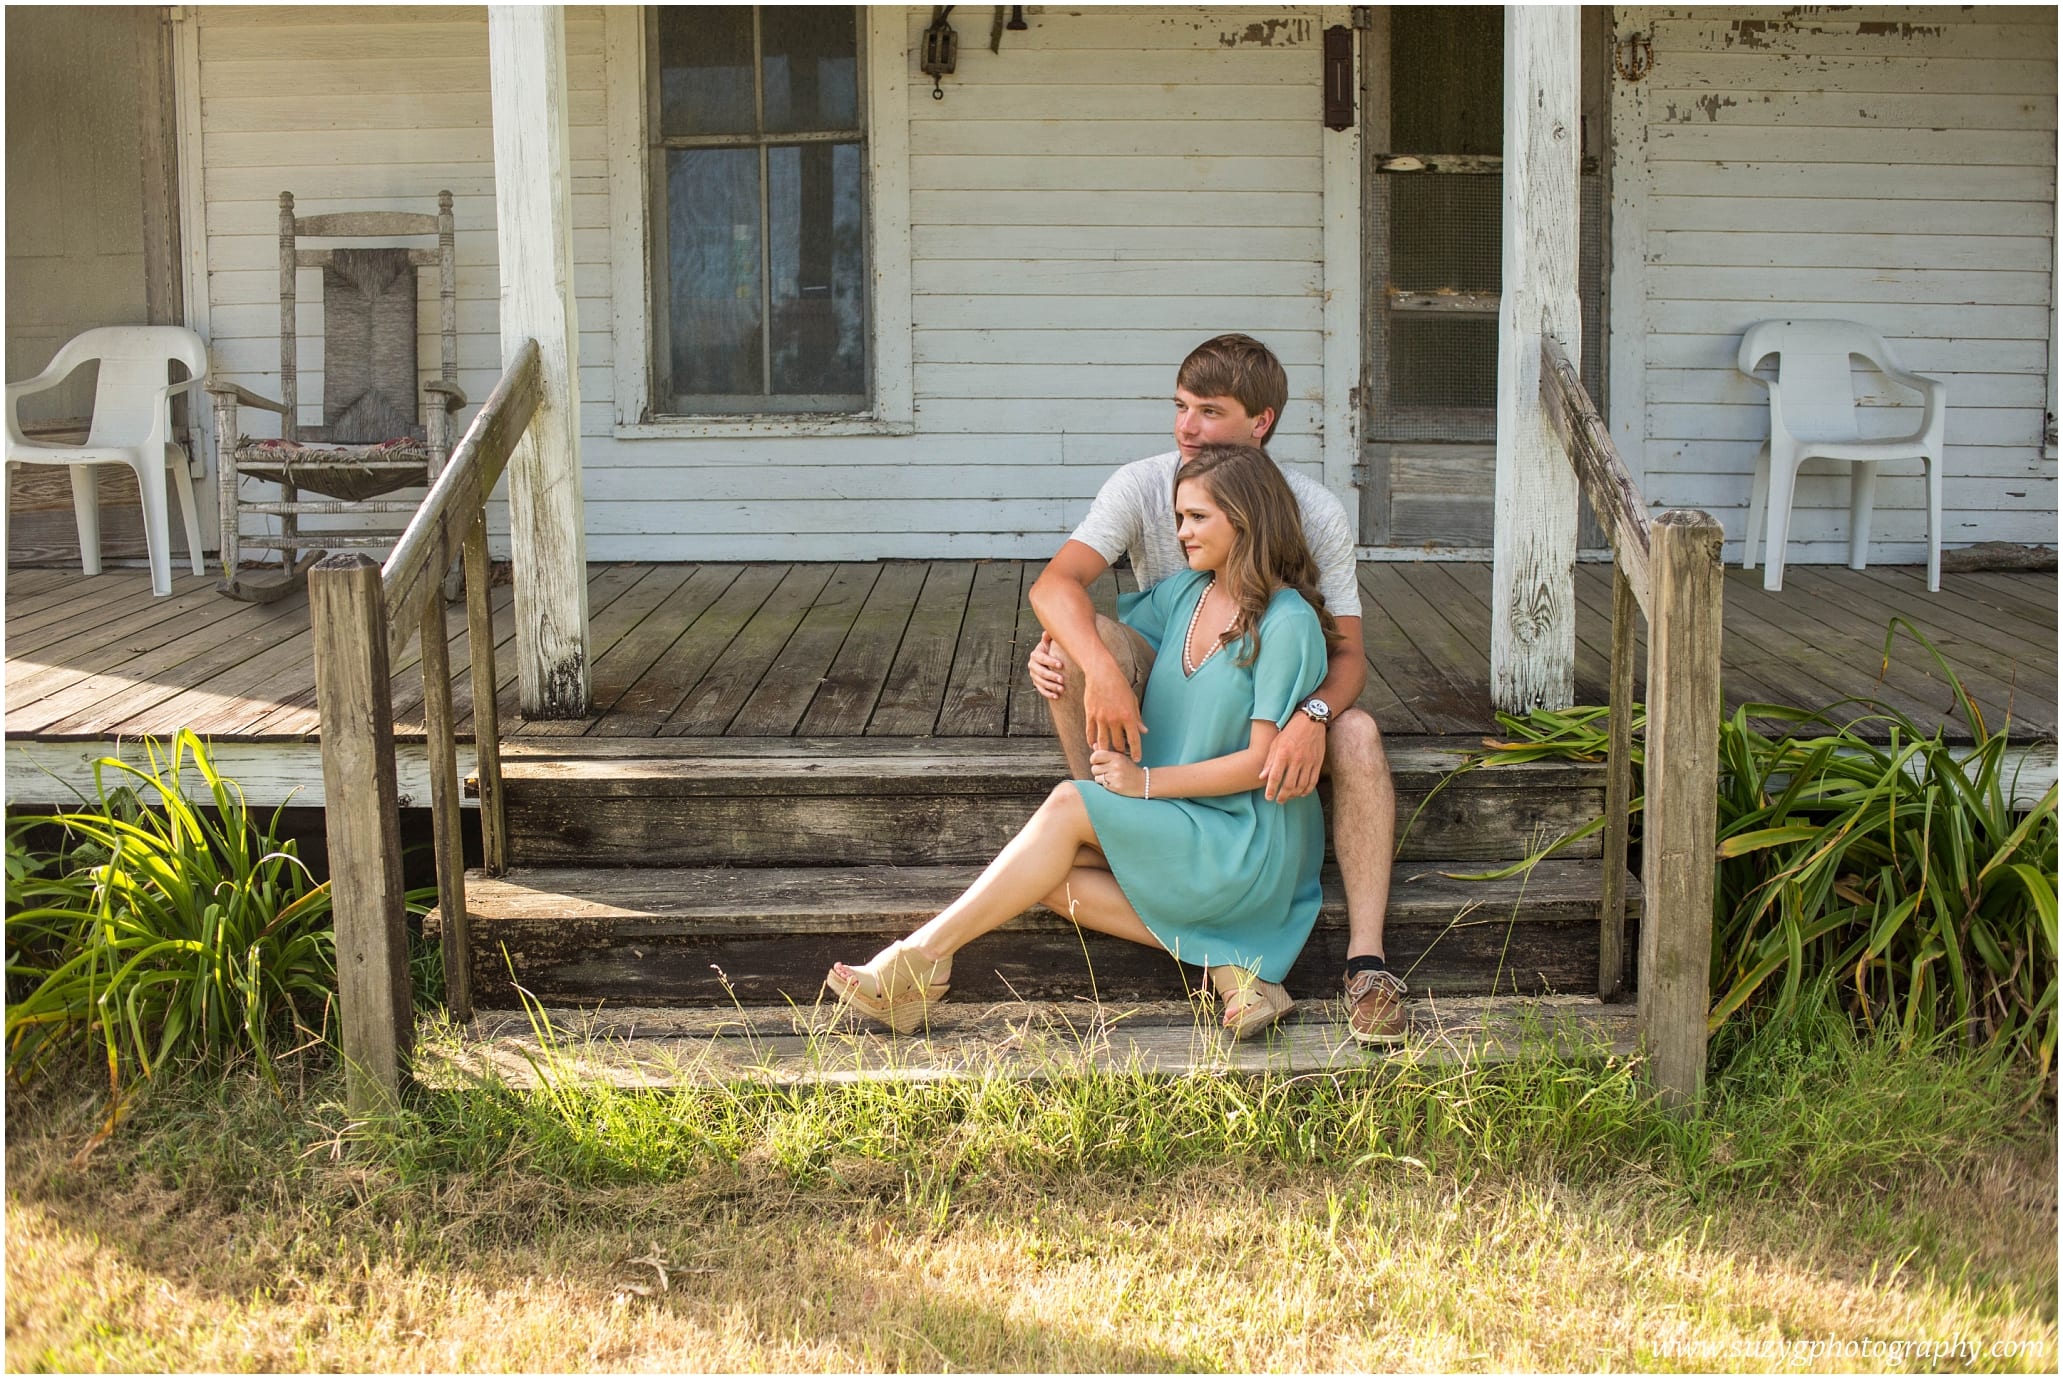 suzy-g-couples-engagement-photography-louisiana-engagement-photography-suzy-g_0002